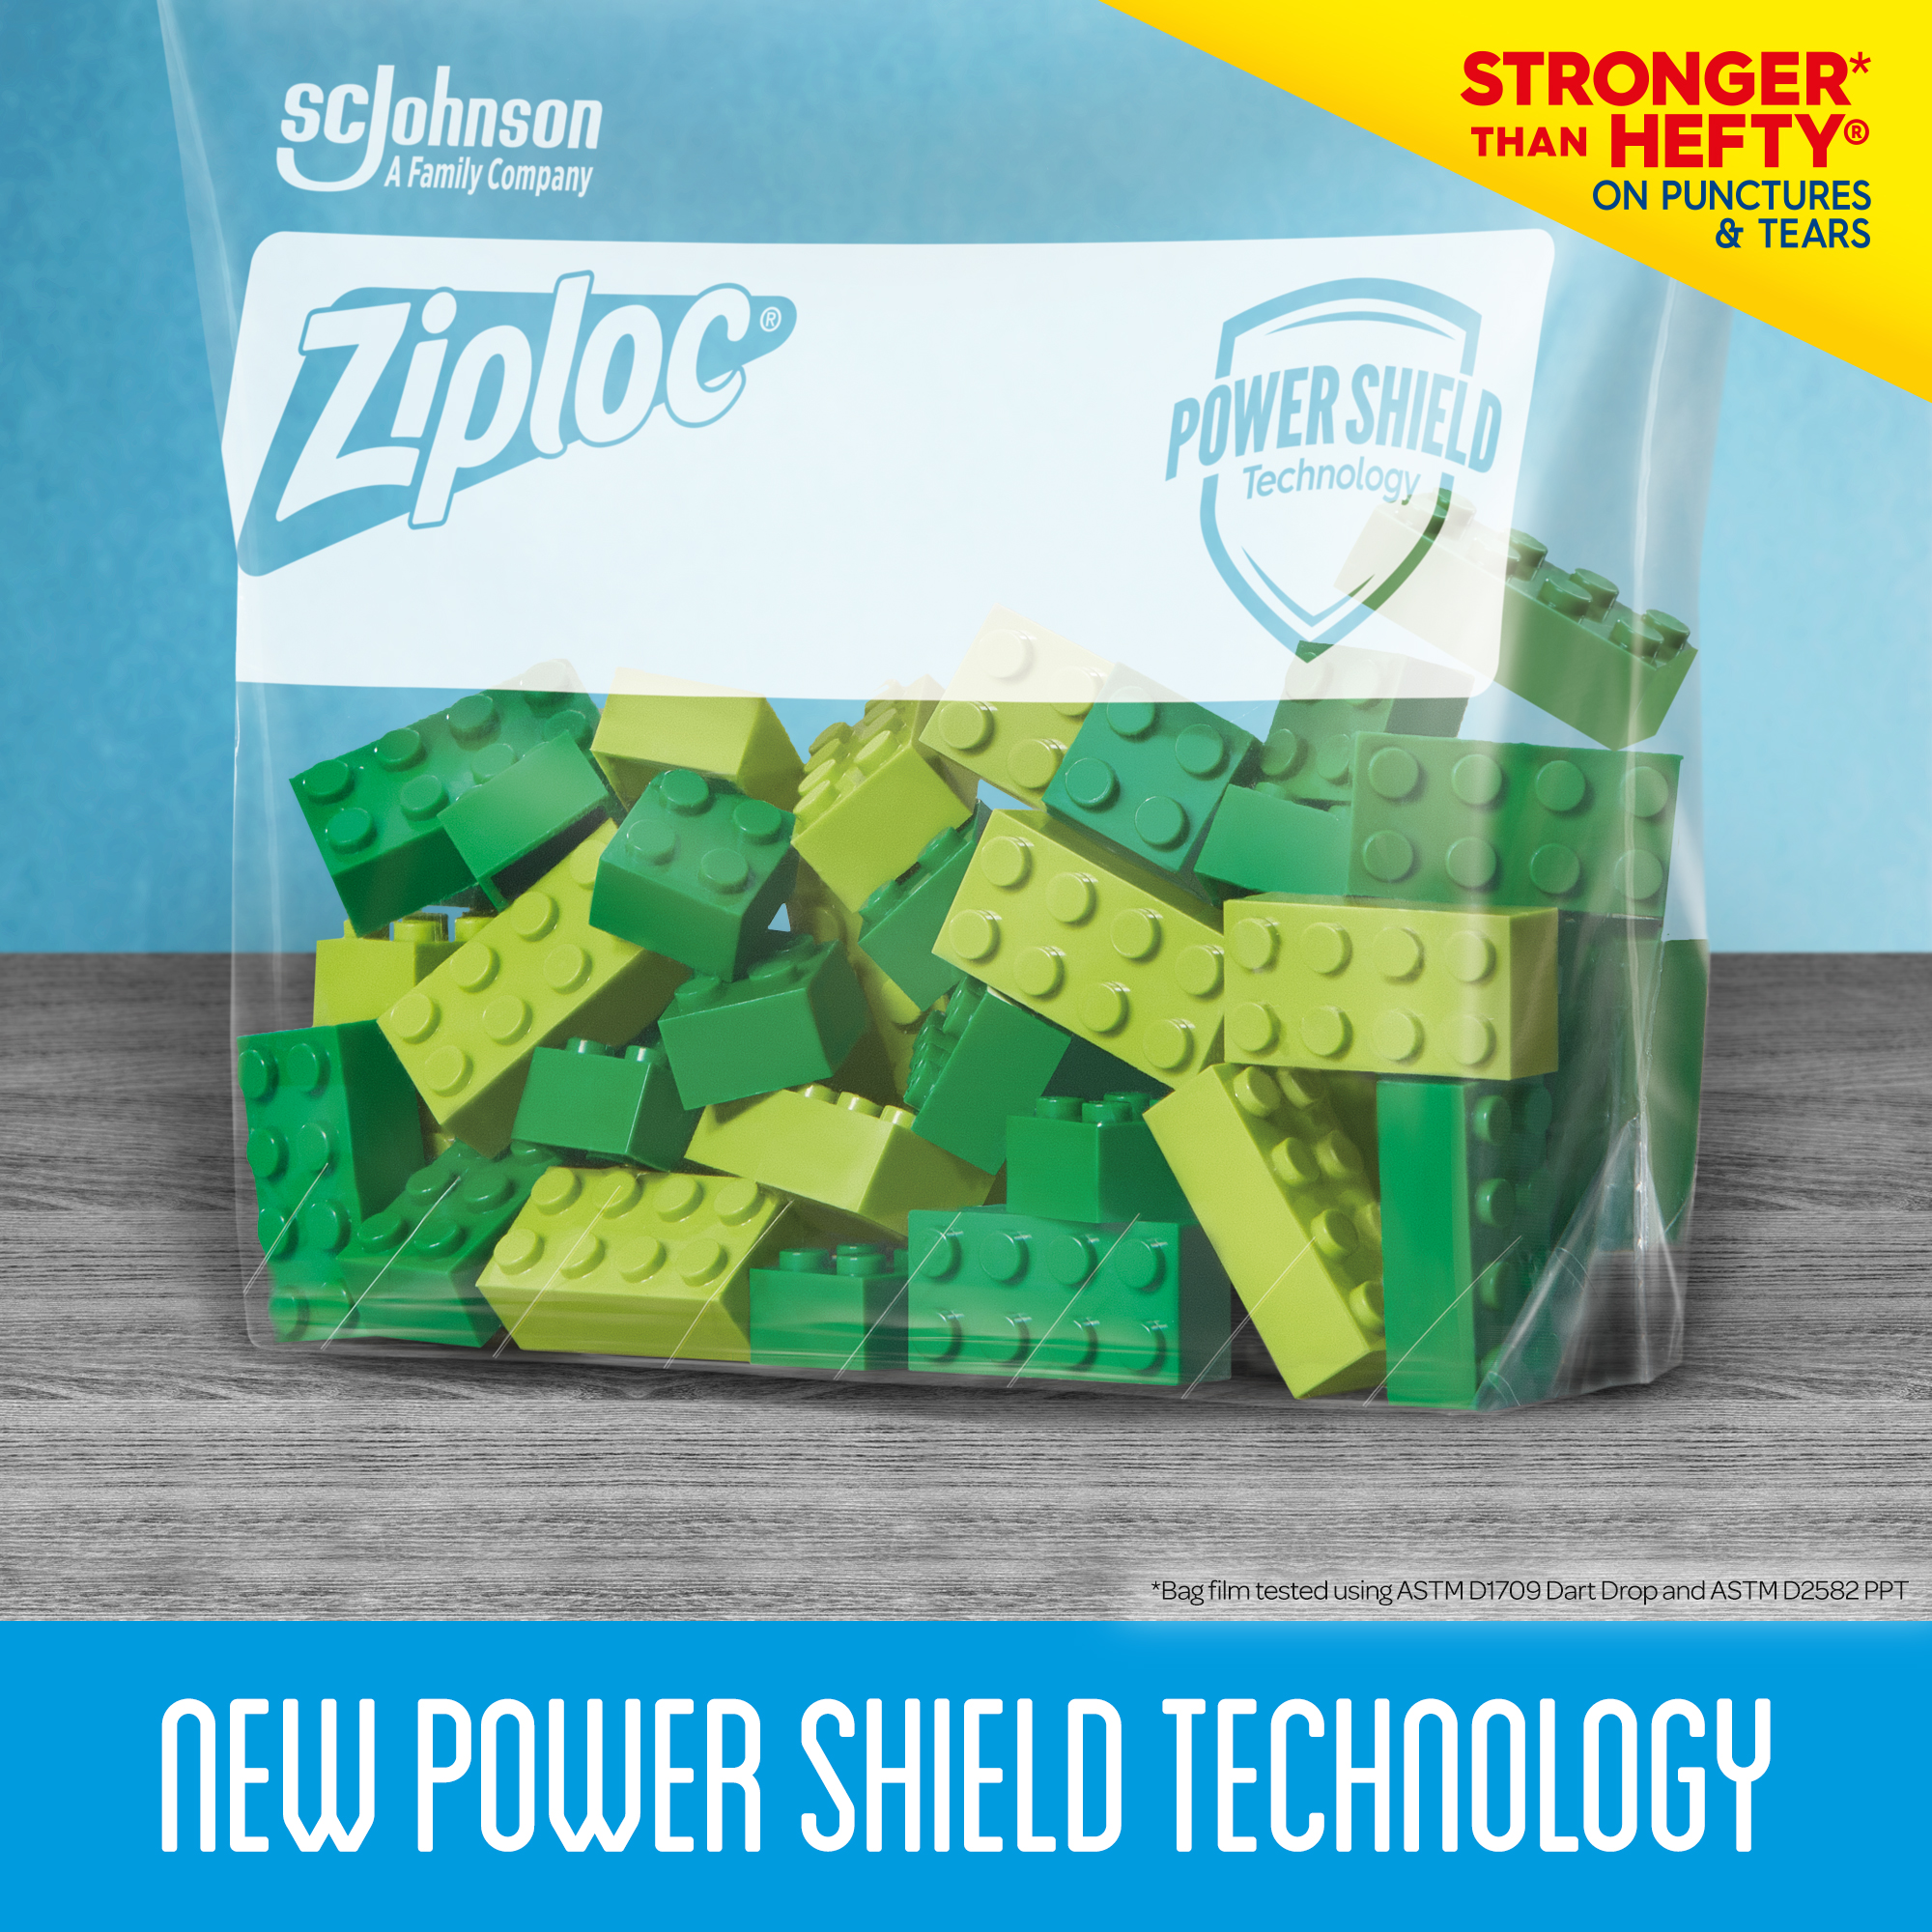 Ziploc Brand Slider Storage Gallon Bags with Power Shield Technology, 40 Count - image 3 of 11